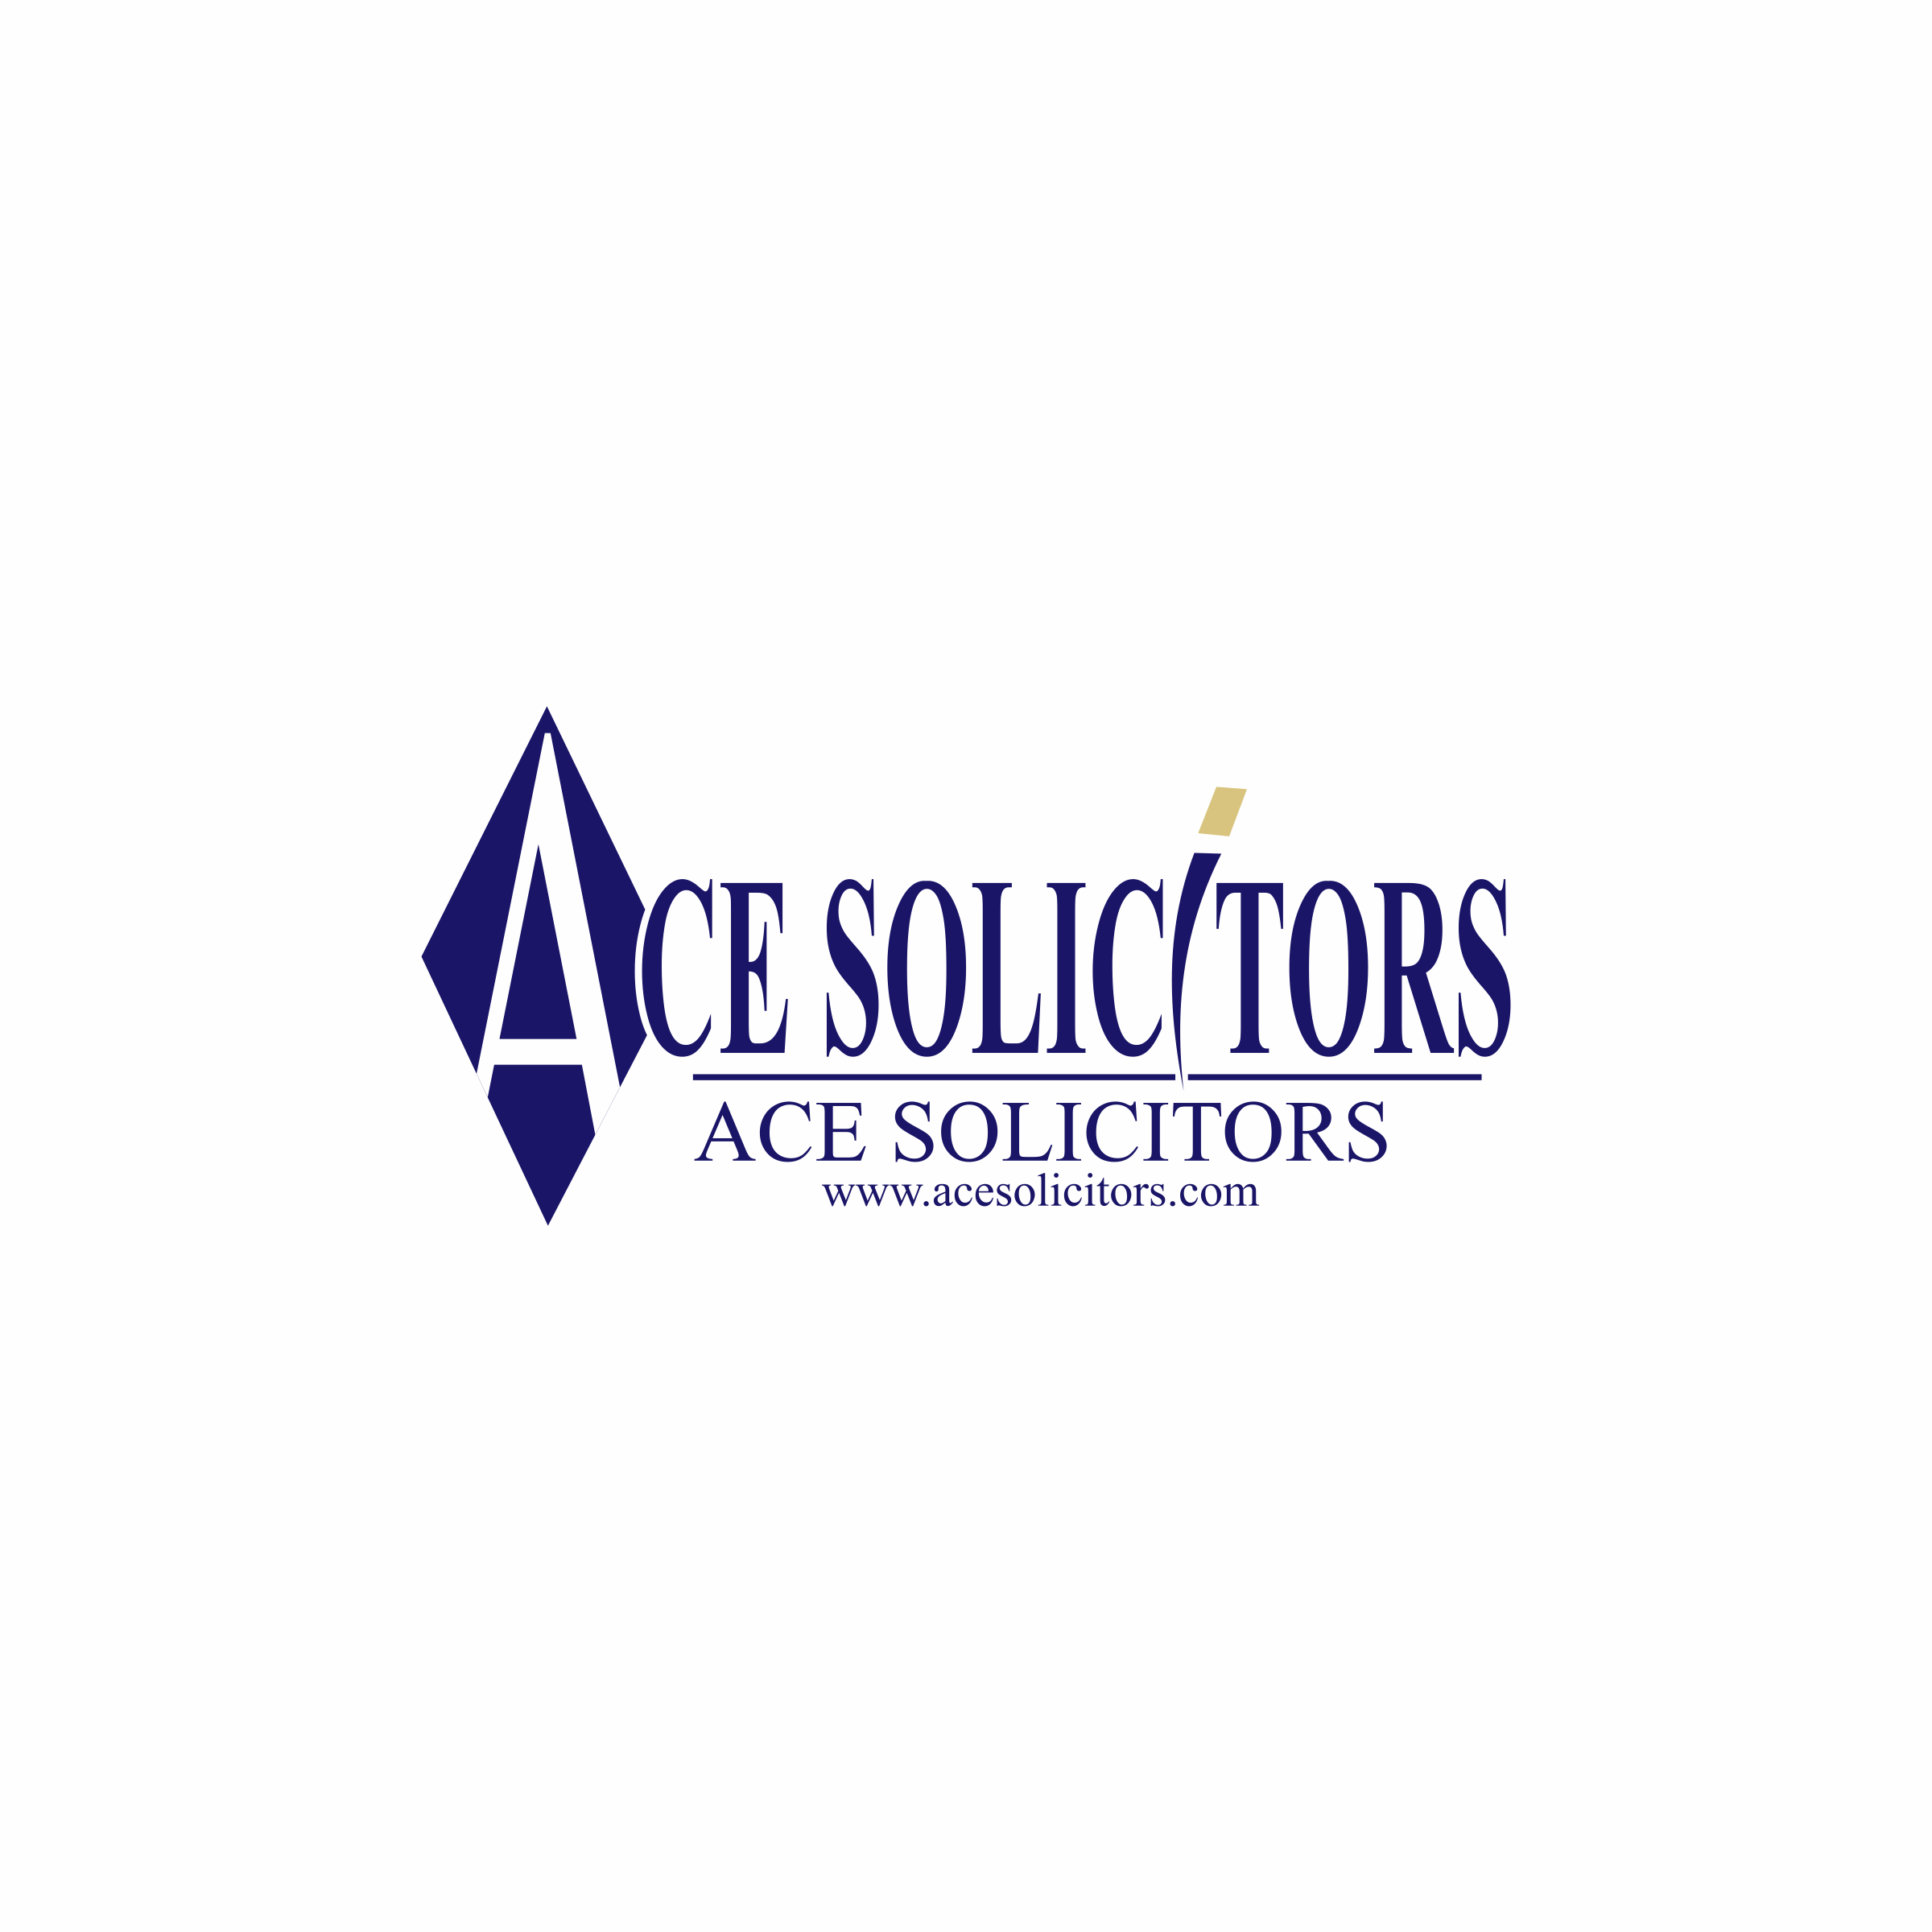 12-Ace solicitors logo